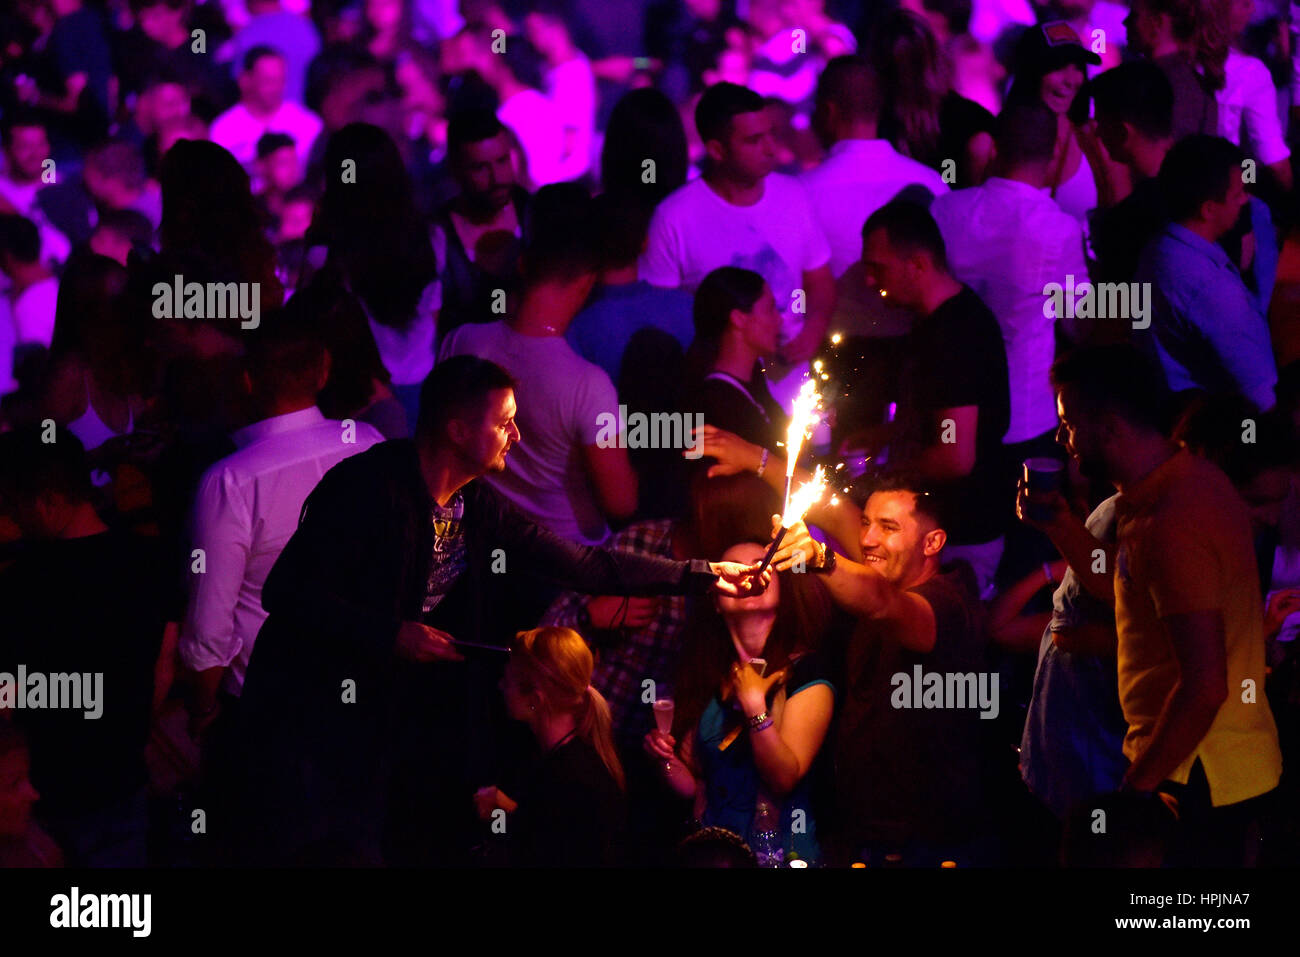 CLUJ NAPOCA, ROMANIA - JULY, 8, 2016: Man from the crowd holding burning torch in his hands at a live concert during Untold festival Stock Photo